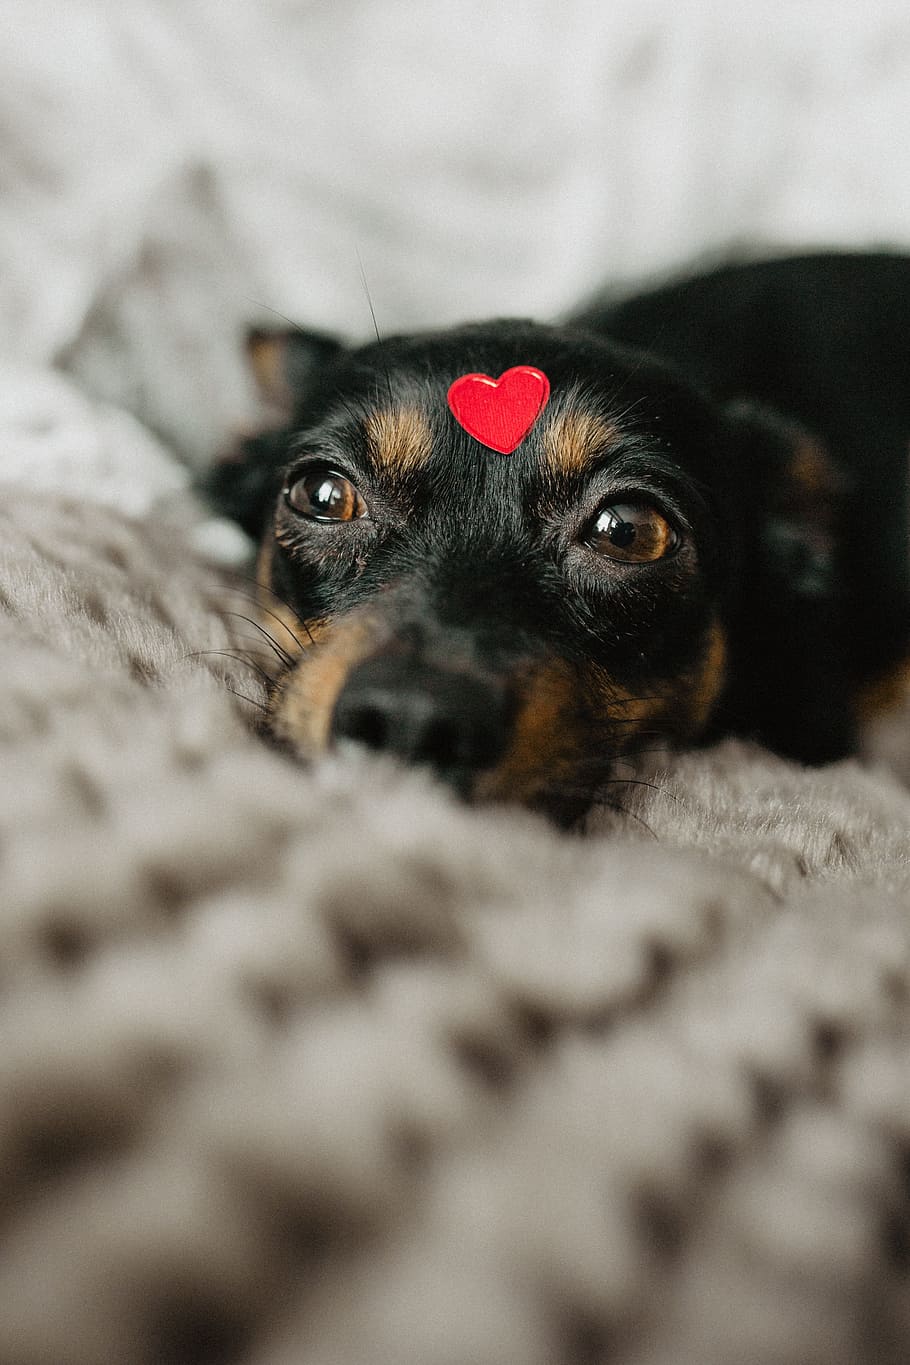 A dog with heart on head, pet, animal, cute, puppy, adorable